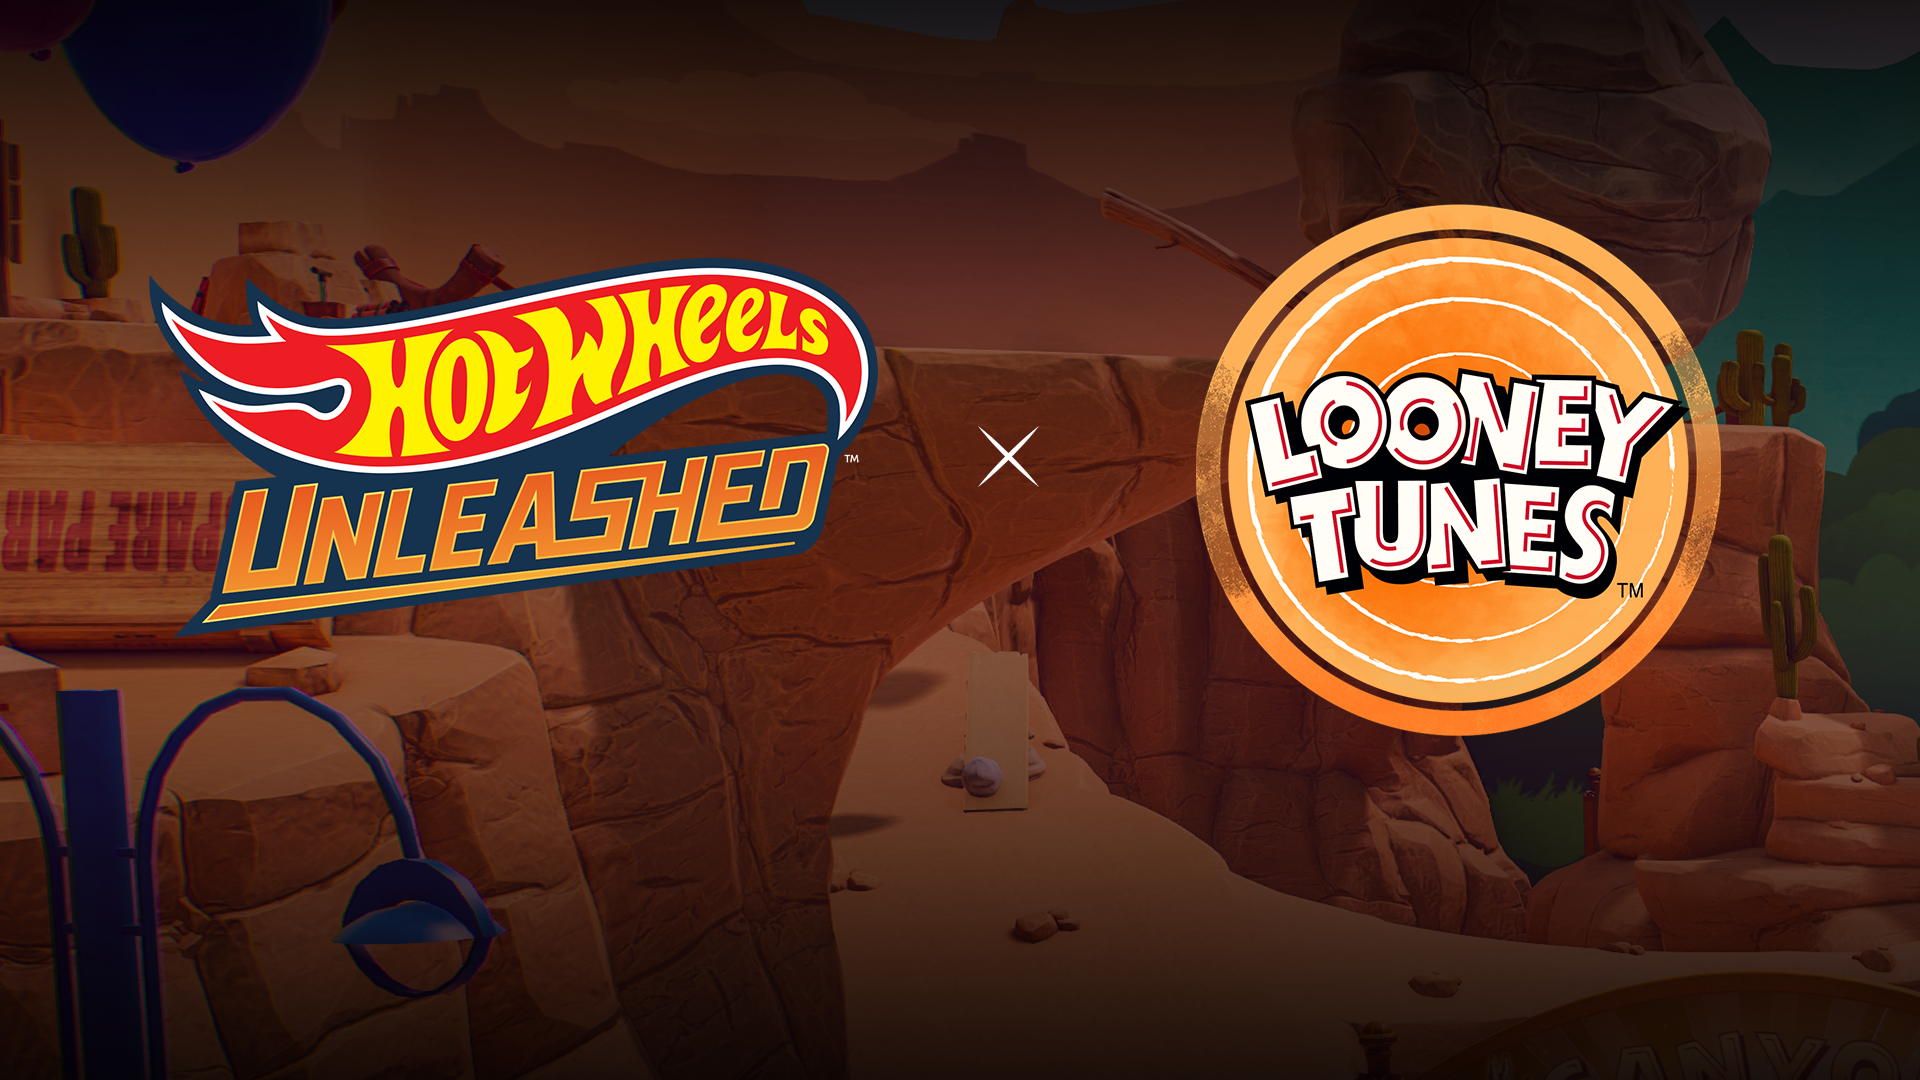 Mattel & Milestone Announce The Hot Wheels – Looney Tunes Expansion For Hot Wheels Unleashed